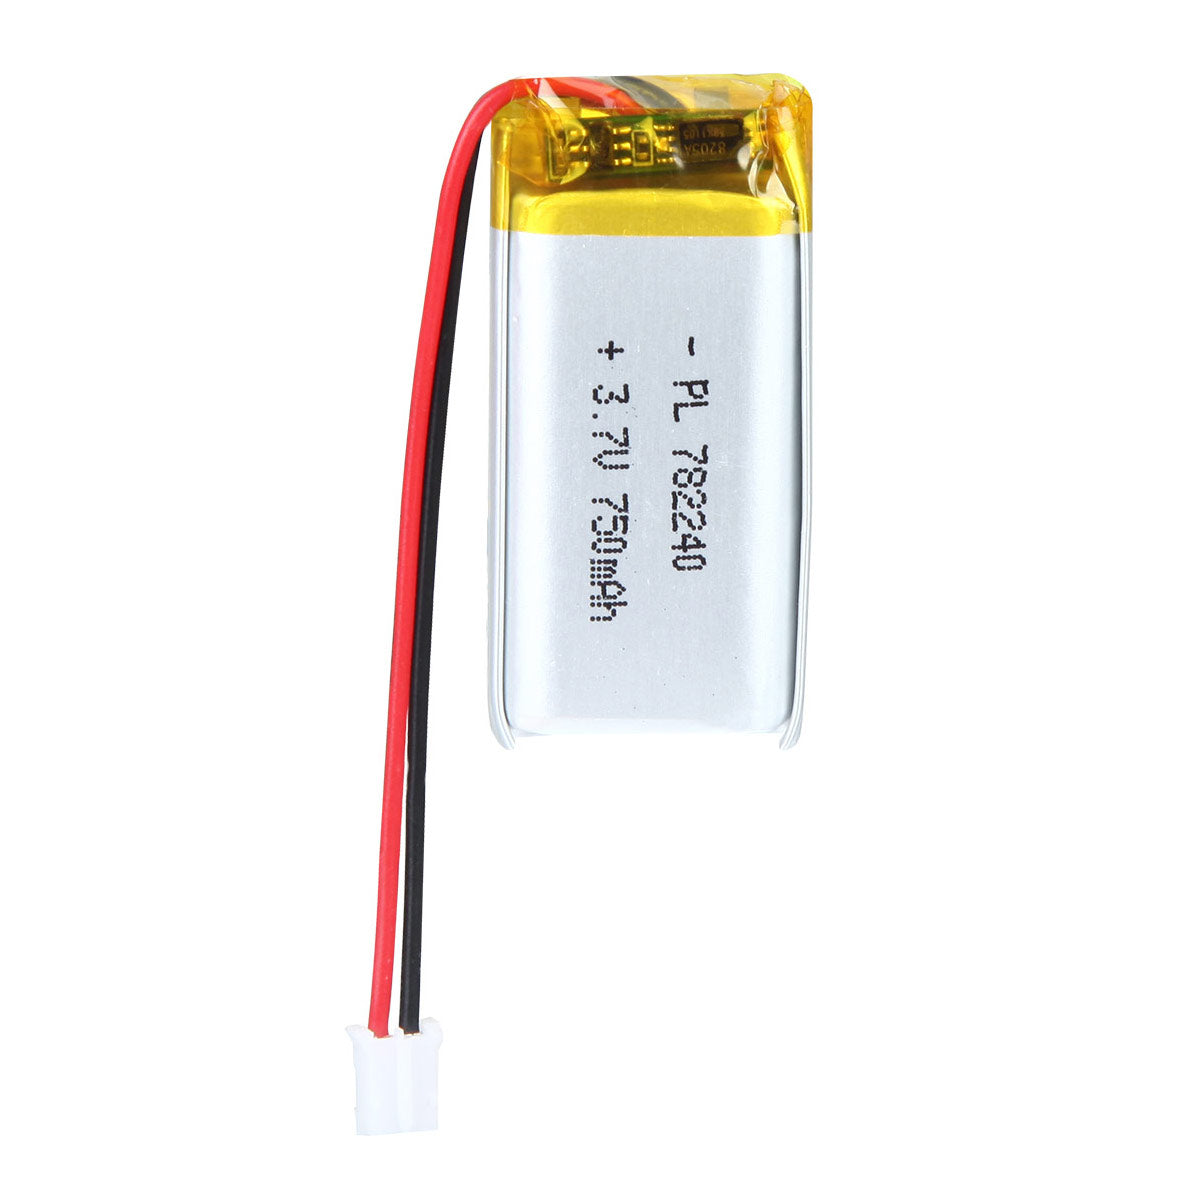 3.7V 750mAh 782240 Rechargeable Lithium Polymer Battery